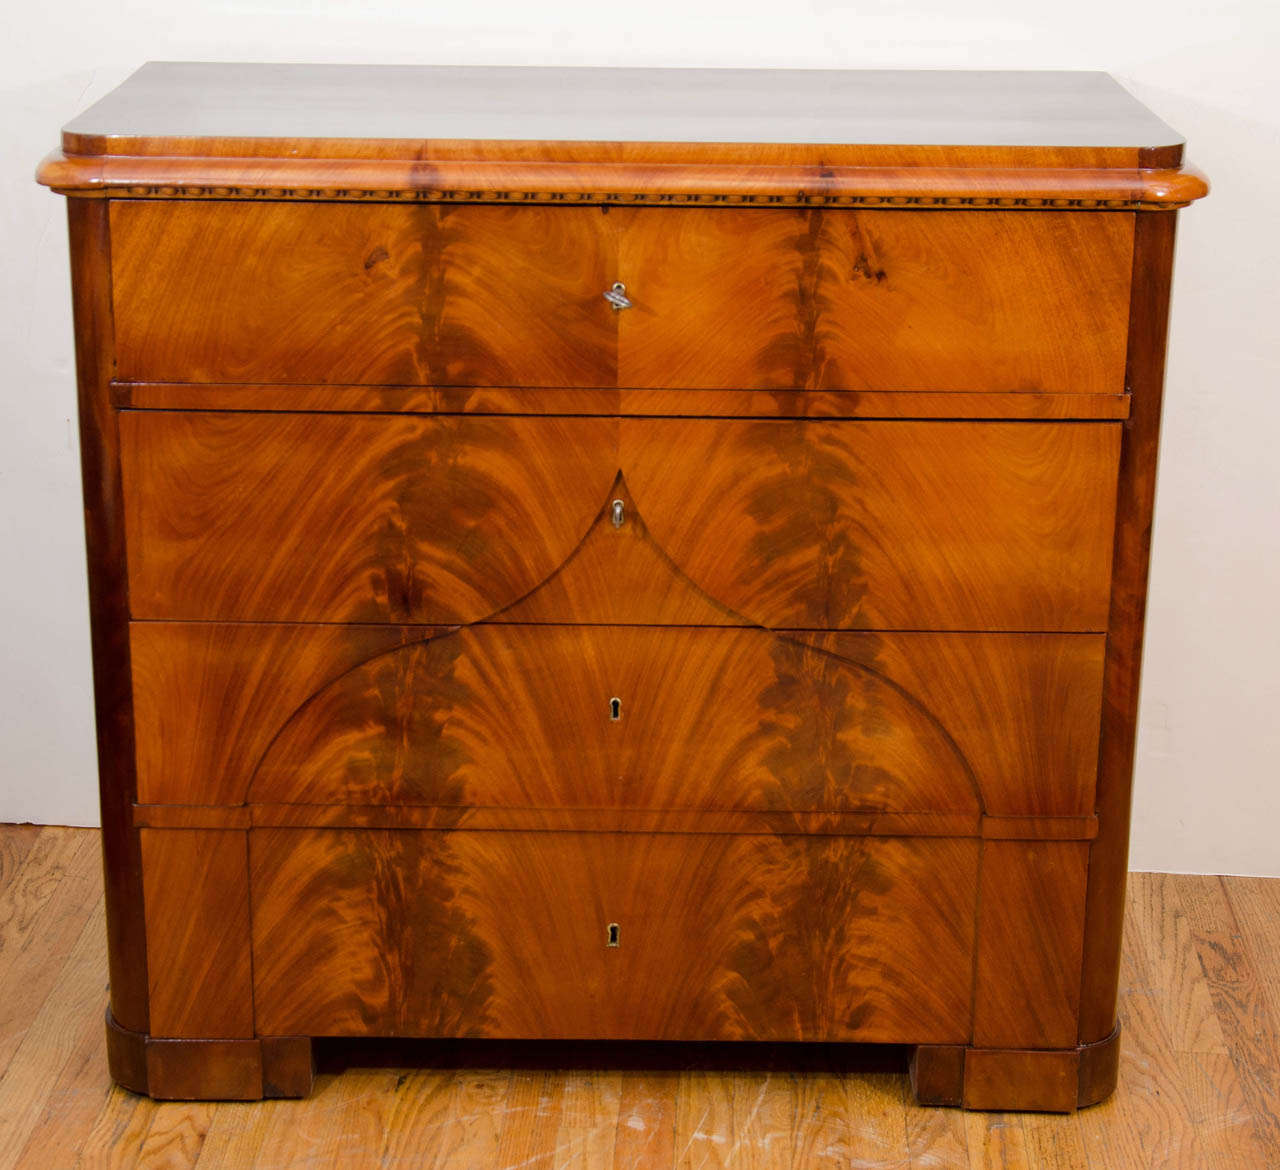 A locking, four drawer chest, whose uppermost drawer drops to reveal six interior drawers and a double-doored inner cabinet designed for safeguarding valuable documents or jewelry.  Crafted of solid fir, birch and mahogany, and embellished with